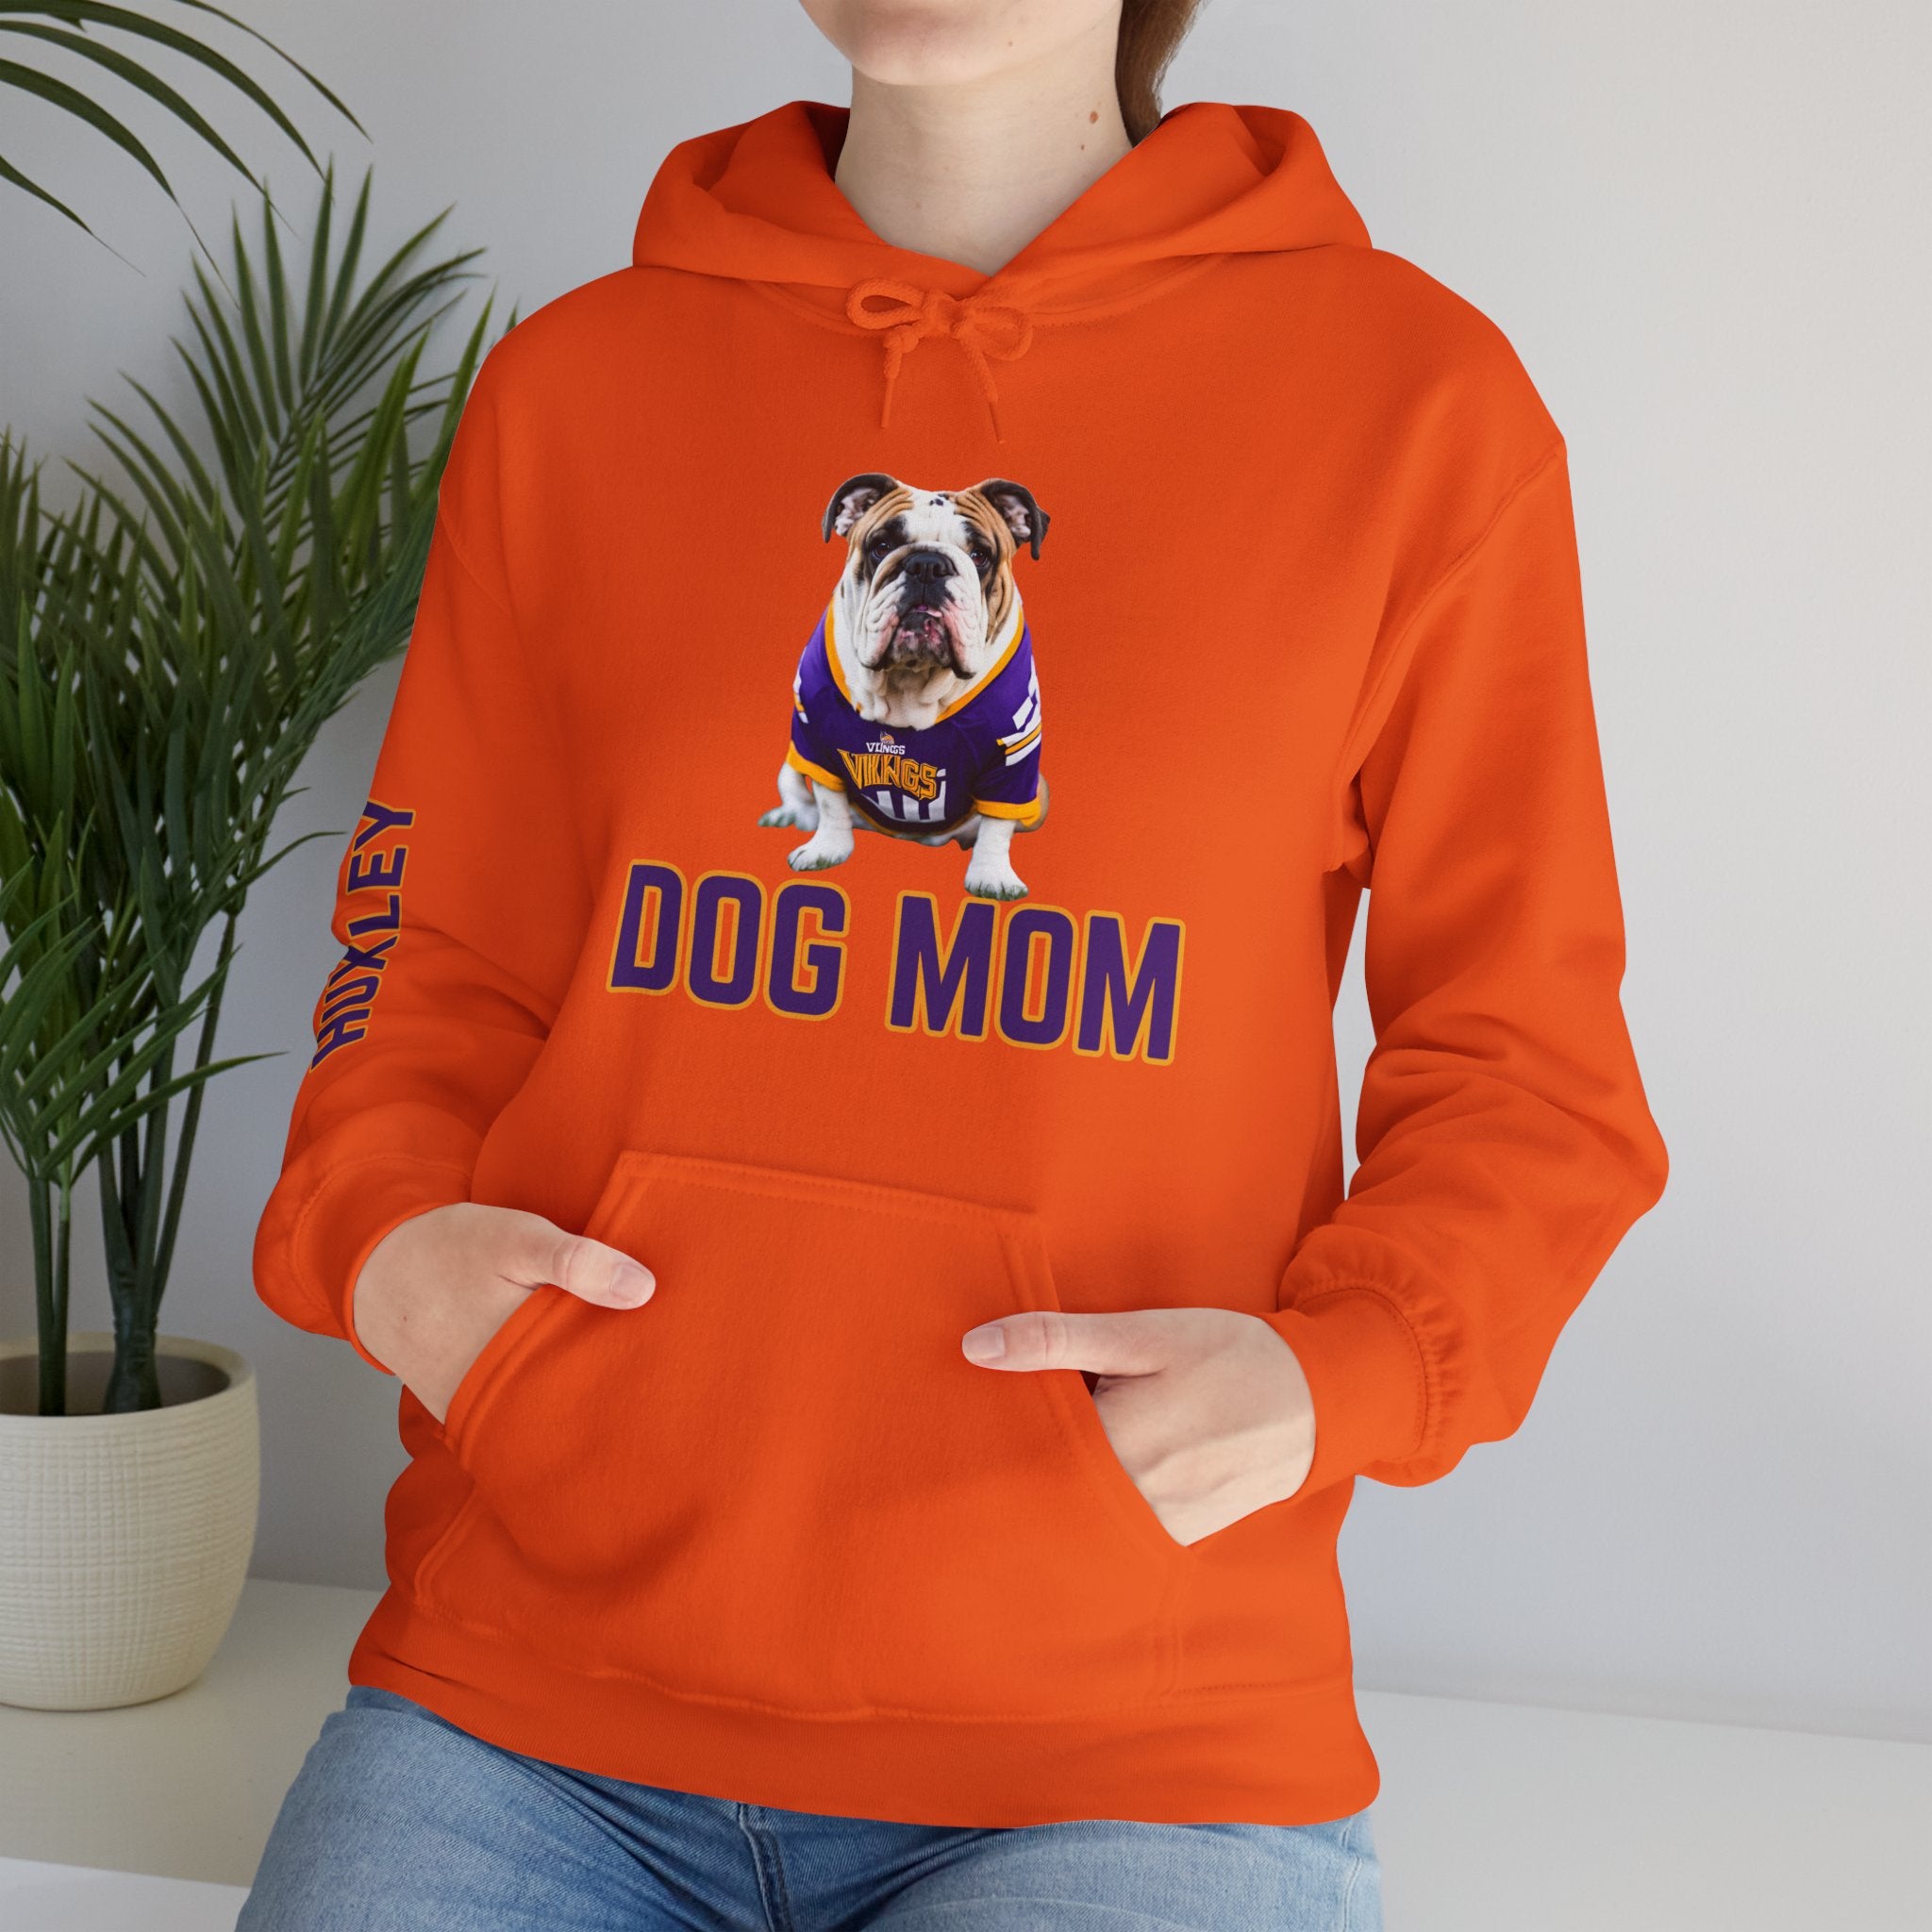 Custom "Dog Dad/Dog Mom" Hoodie with Your Bulldog's Picture & Name (English)